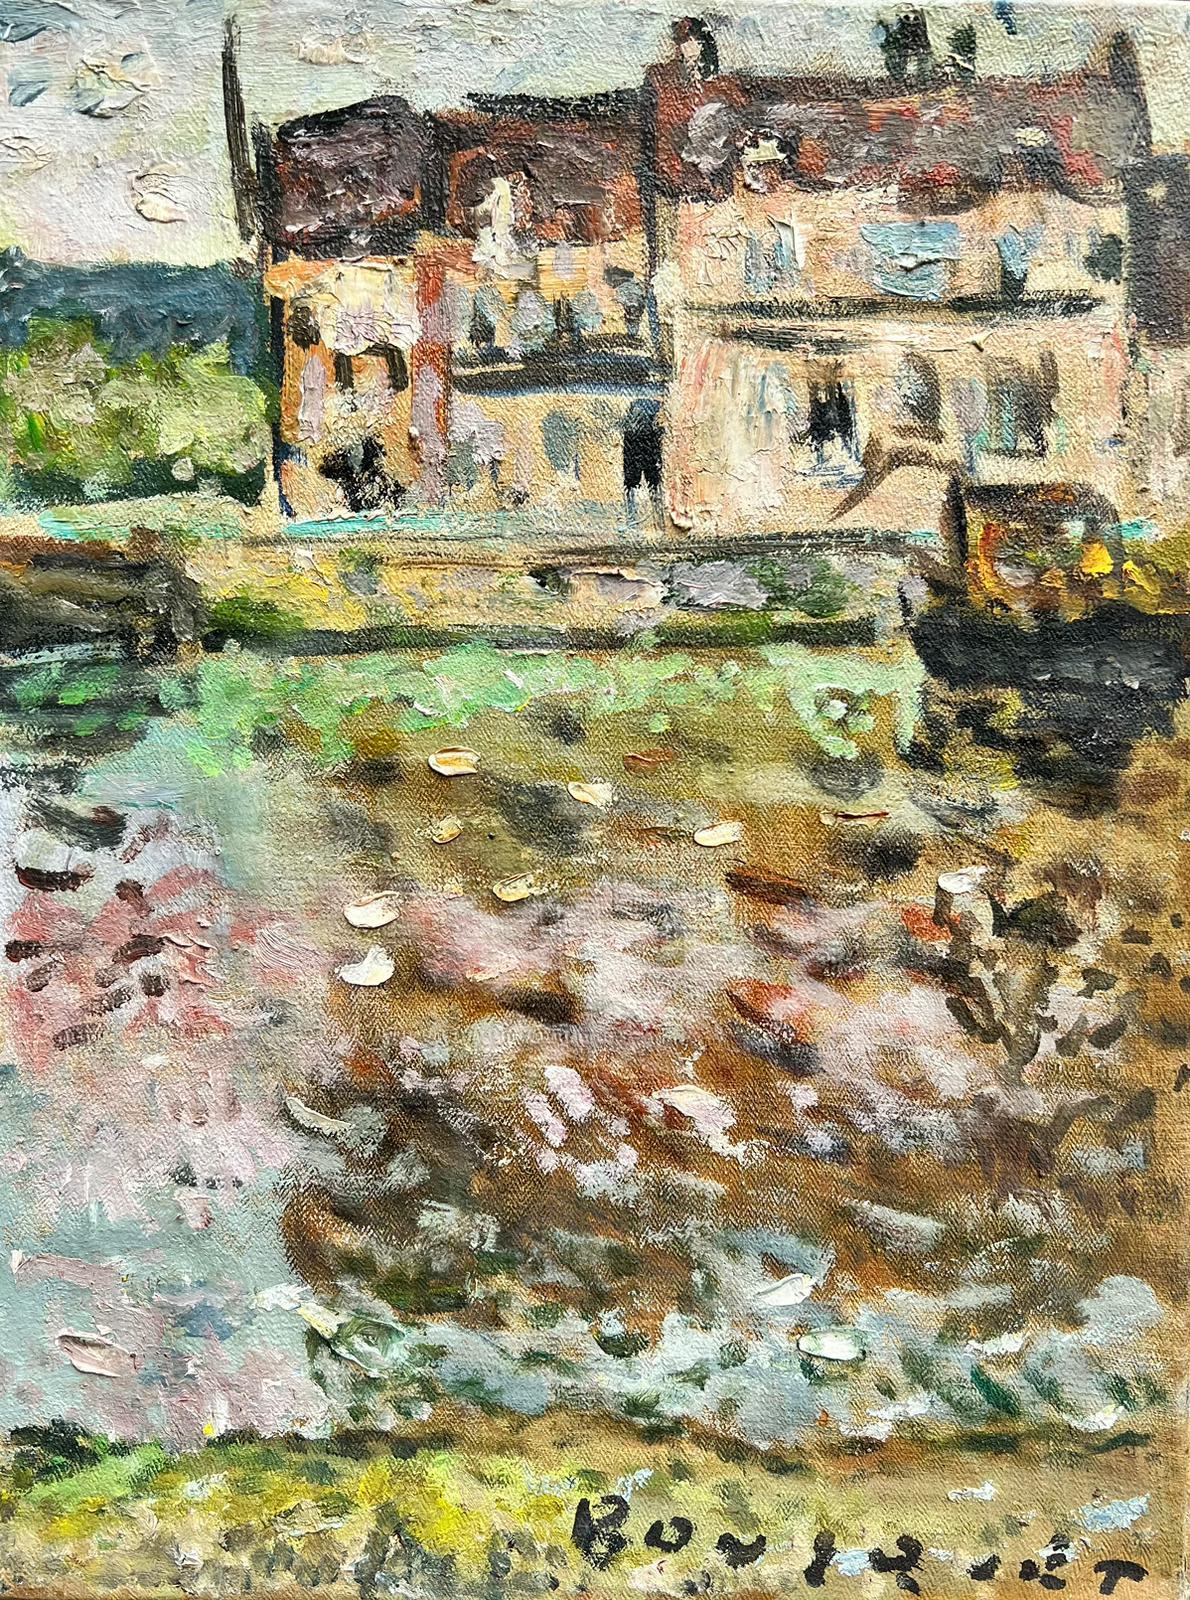 Georges Bousquet Landscape Painting - 1960's Signed French Post Impressionist Oil Houses by the River Green Landscape